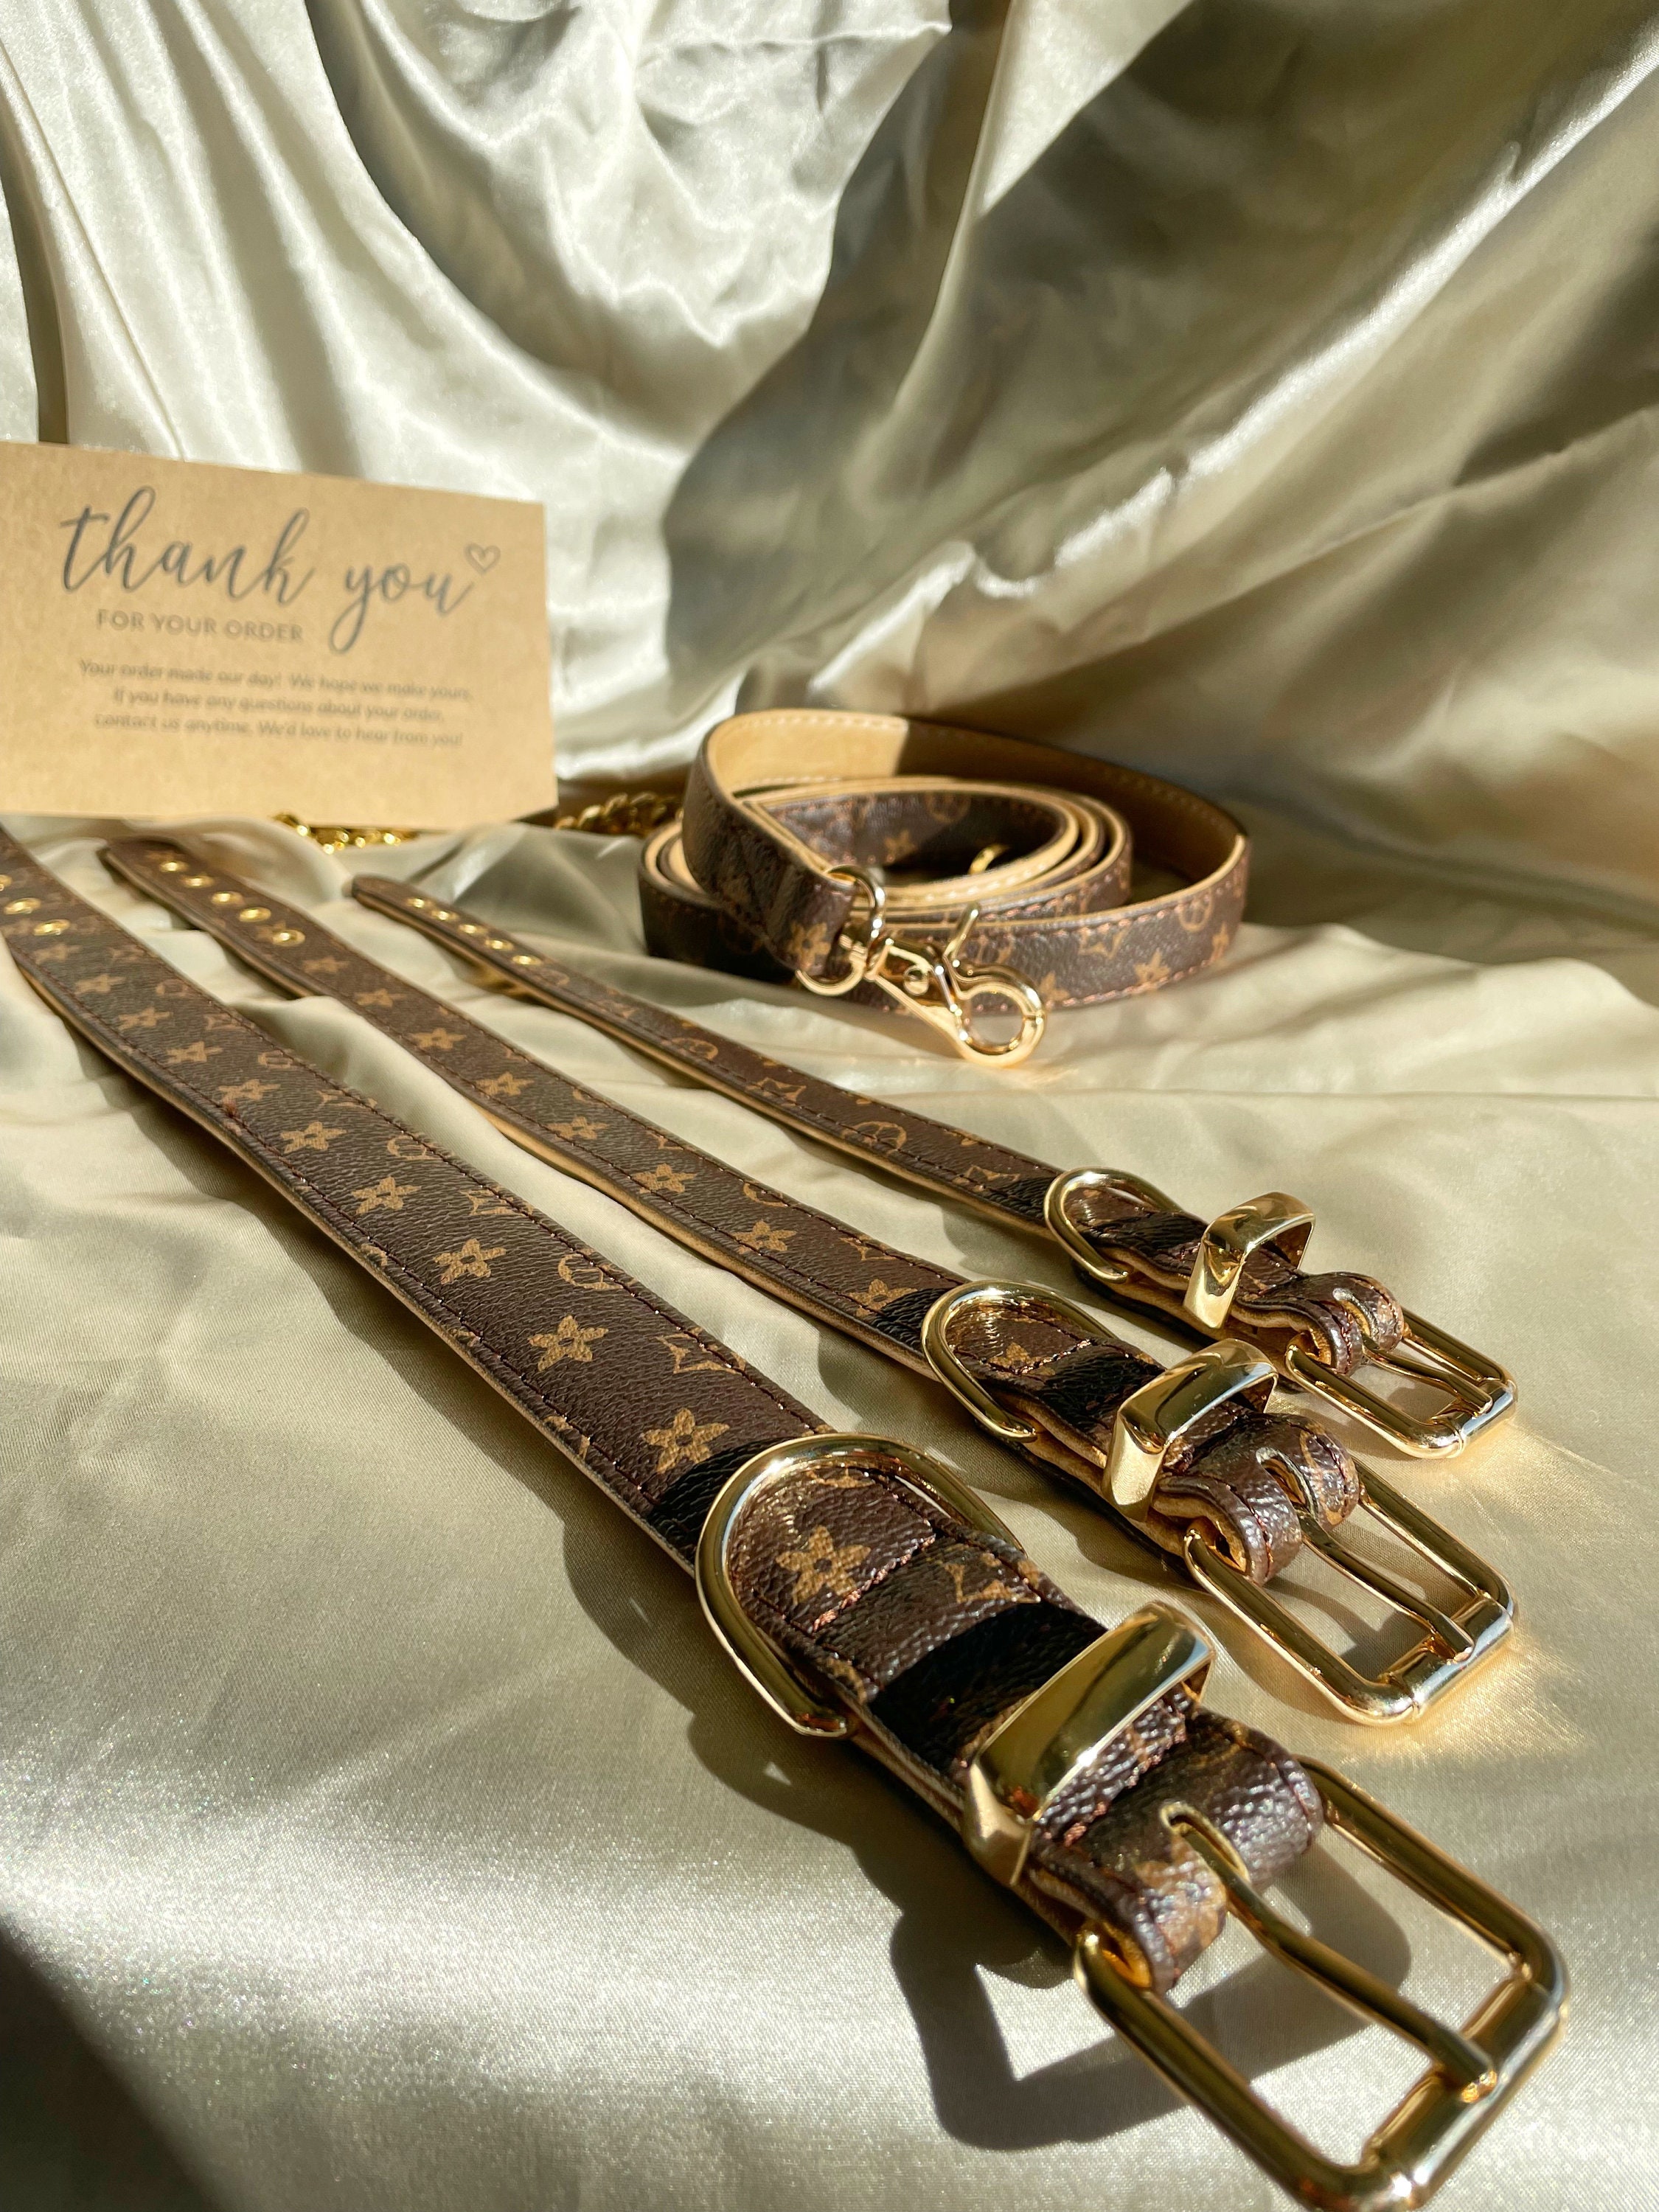 Louis Vuitton Dog Collar and Leash 